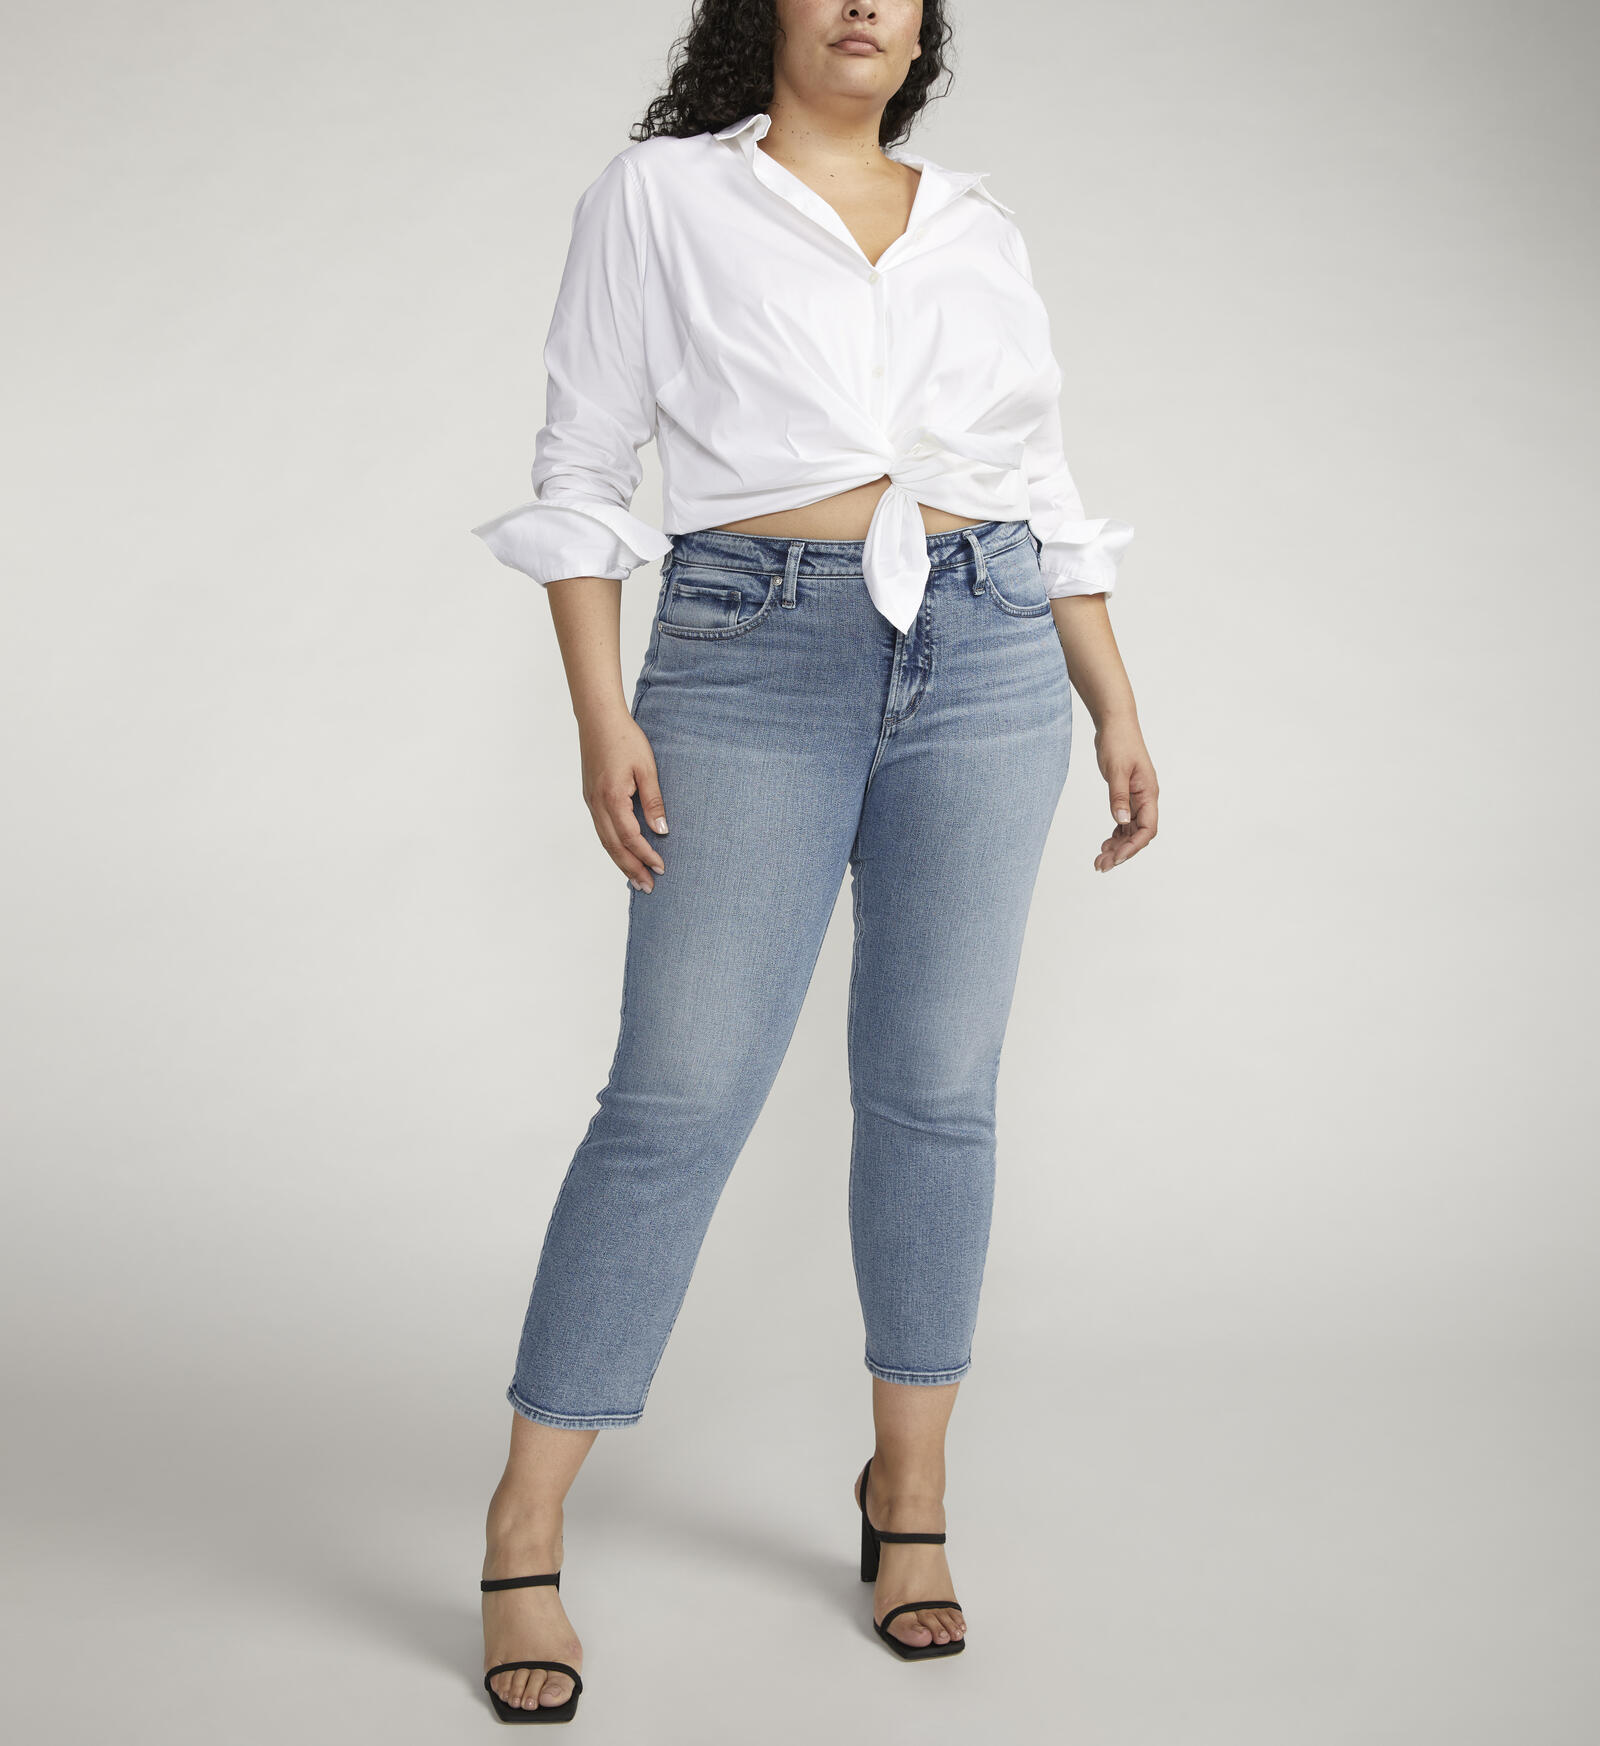 Buy Most Wanted Mid Rise Ankle Straight Leg Jeans Plus Size for CAD 98.00